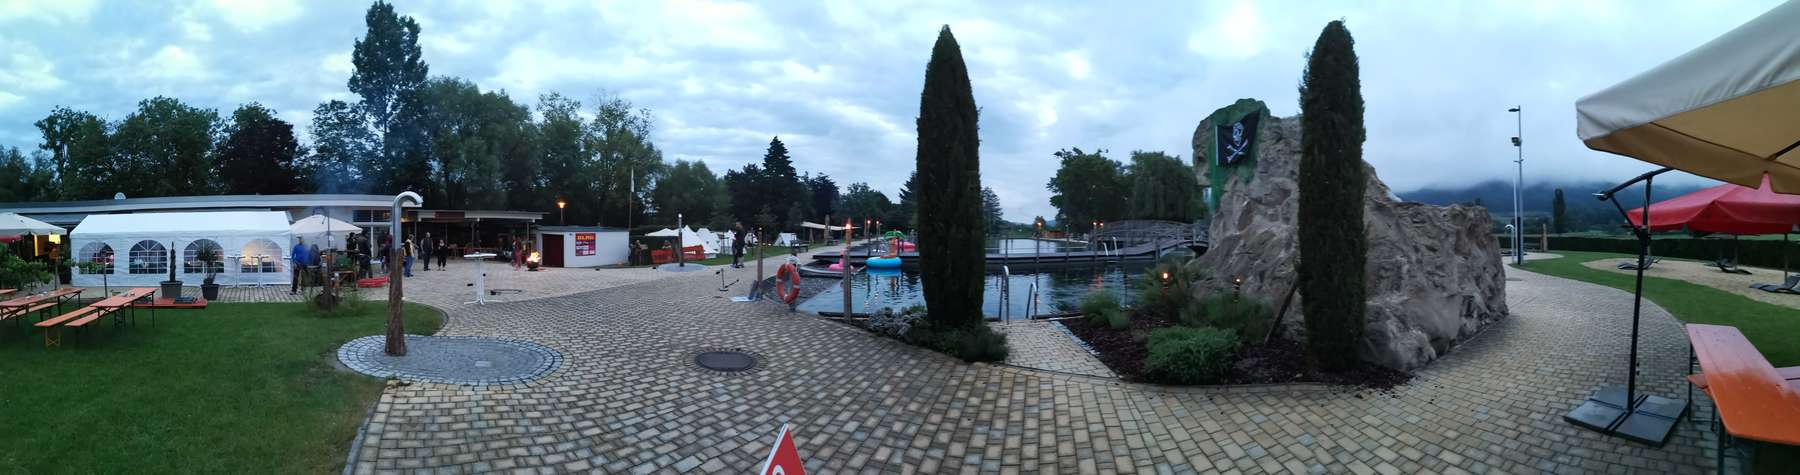 Piratenfest 2019 Naturbad Aachtal_Panorama